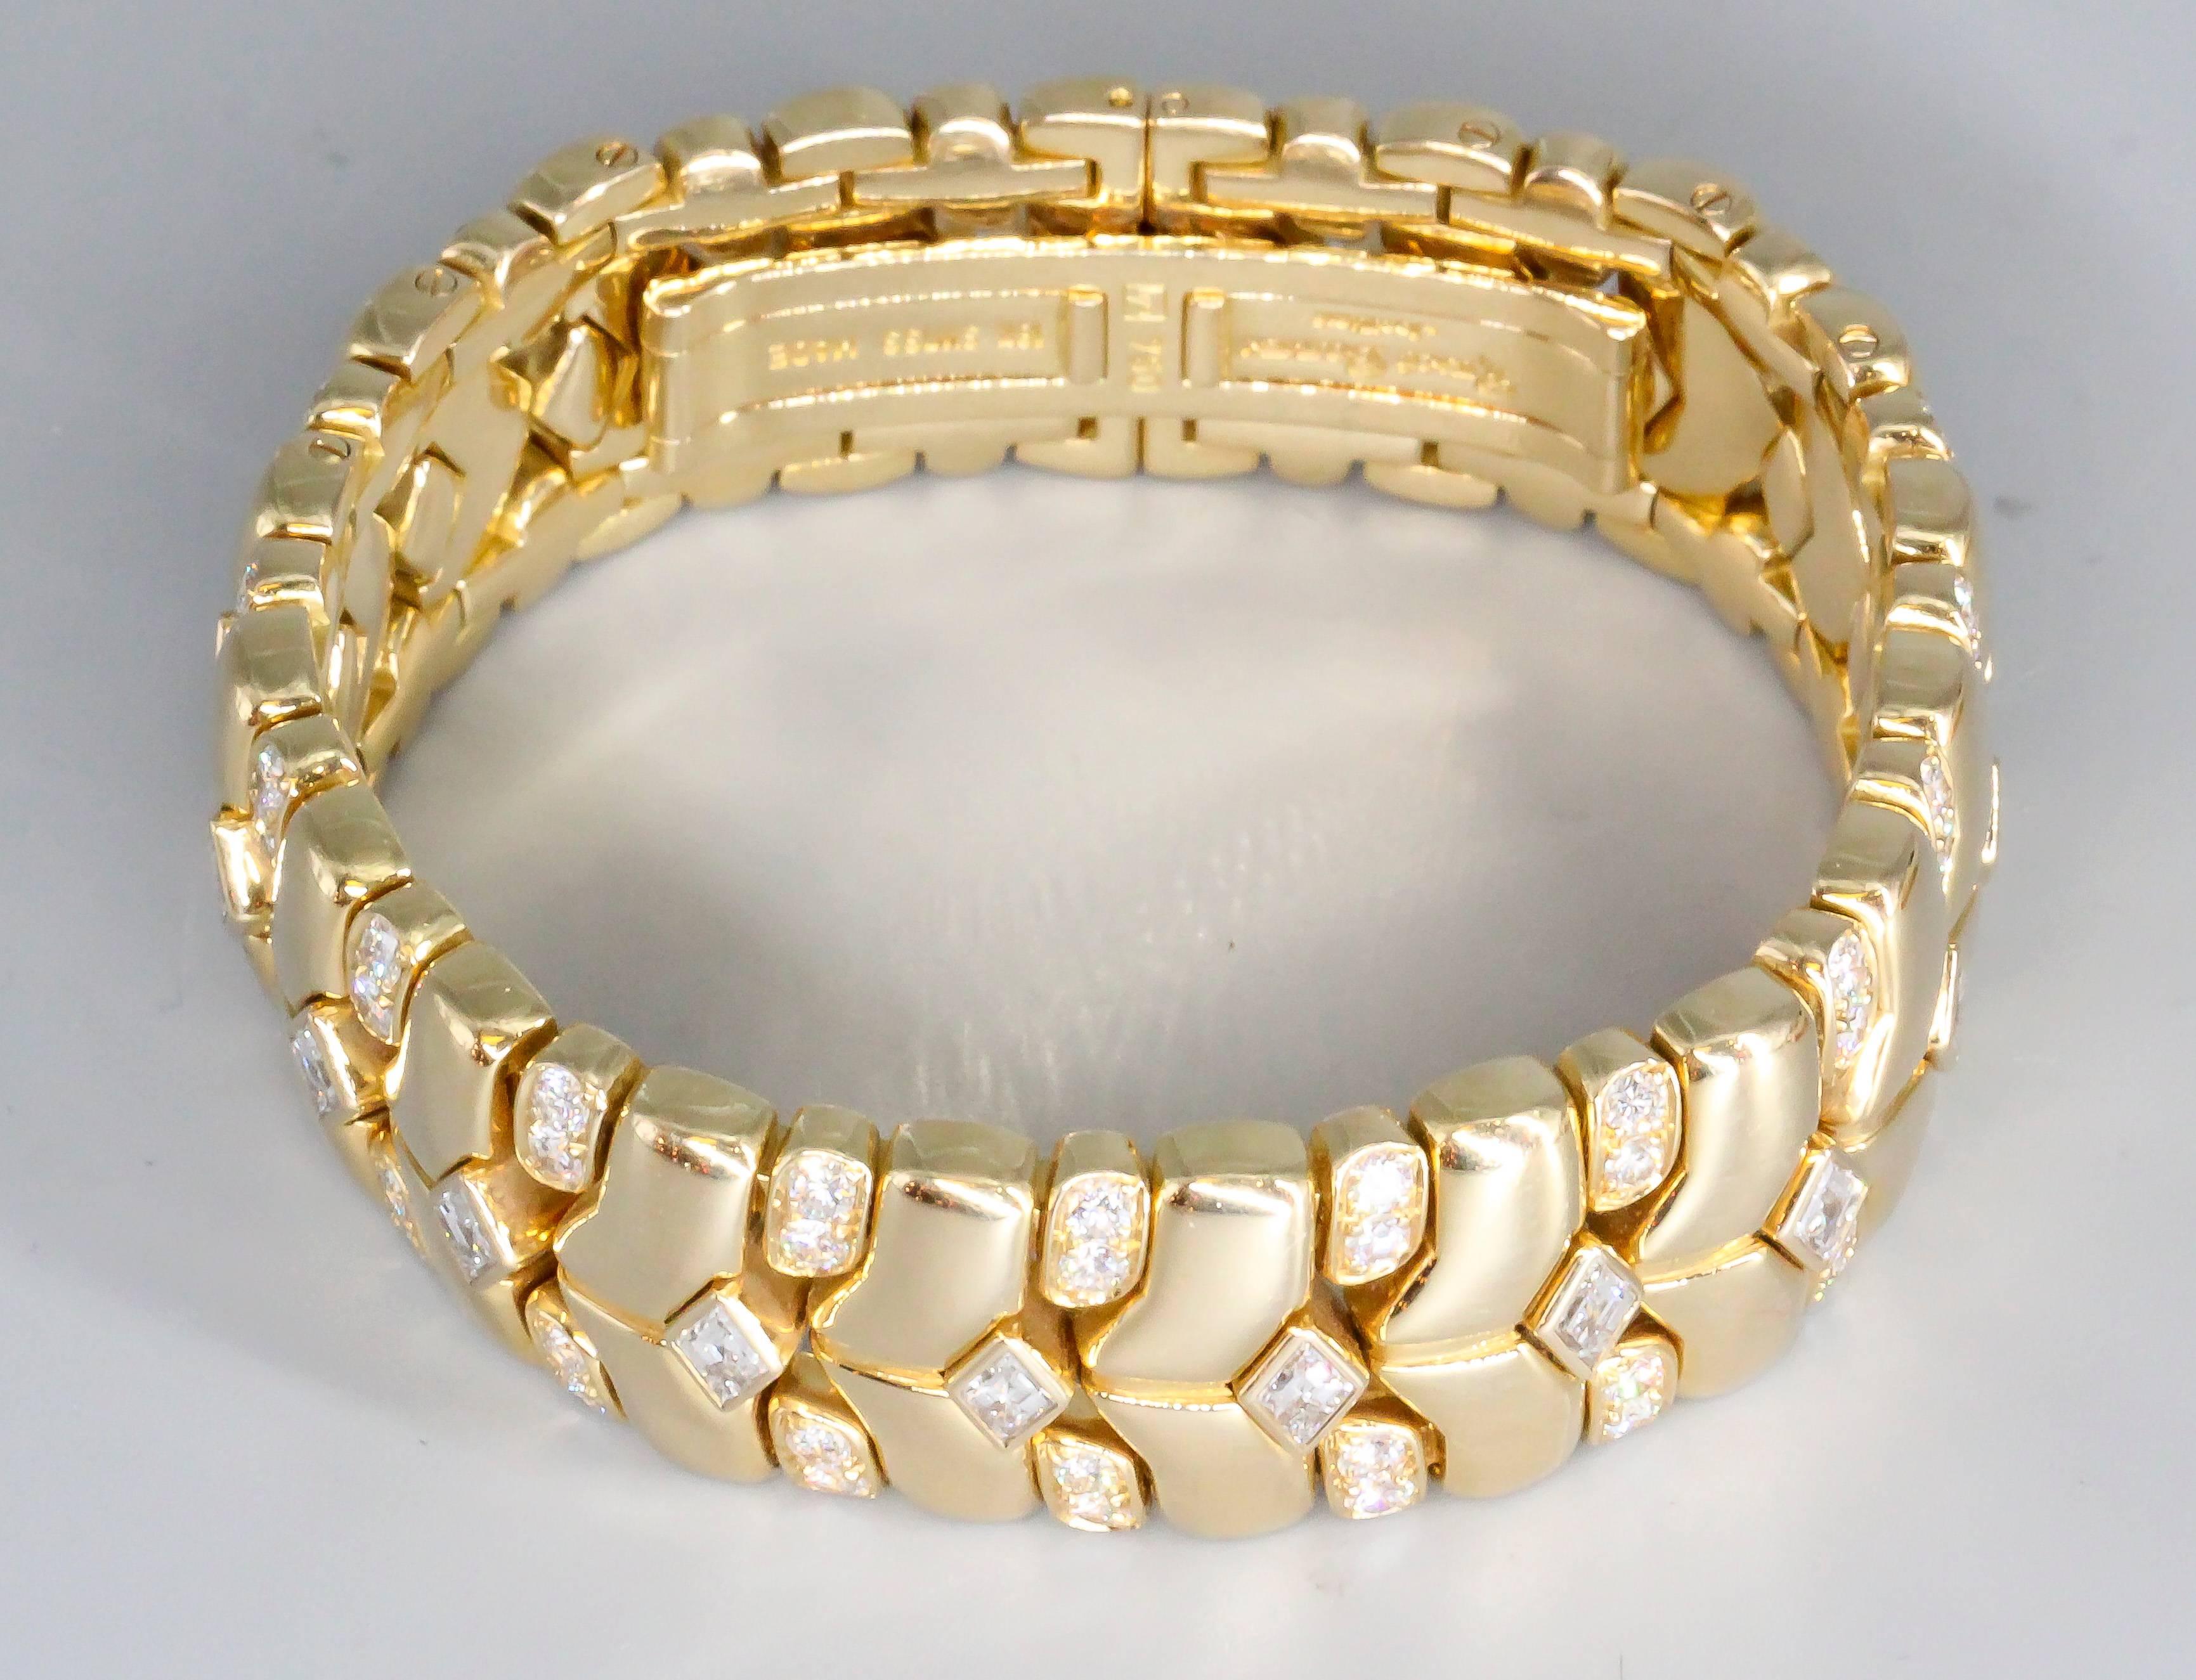 Elegant diamond and 18K yellow gold bracelet by Rene Boivin. It features high grade brilliant round and diamond shape cut diamonds, total weight of approx. 7.0-8.0cts. 18K yellow gold setting, with a dual sided deployment clasp. Beautifully made and